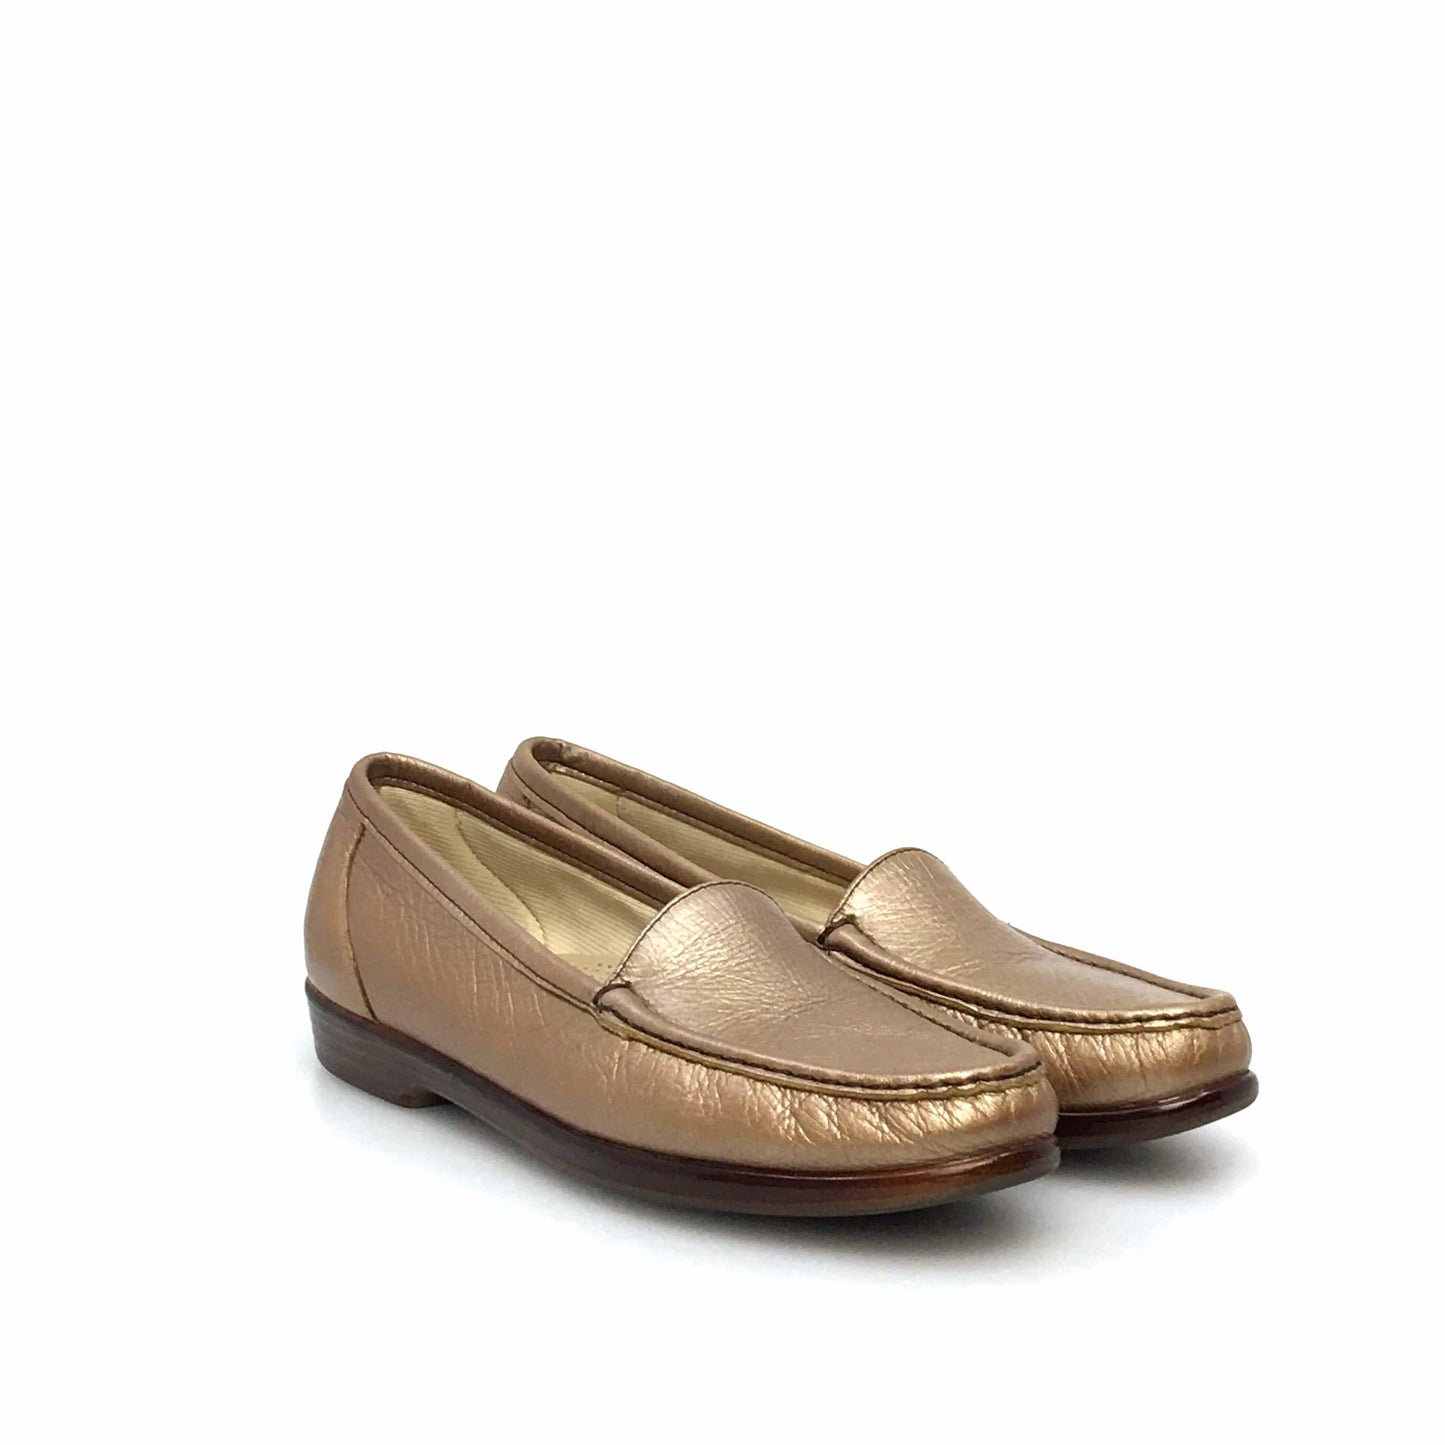 SAS Womens Size 8.5S Leather Loafers Gold Shoes Tripad Comfort Walking